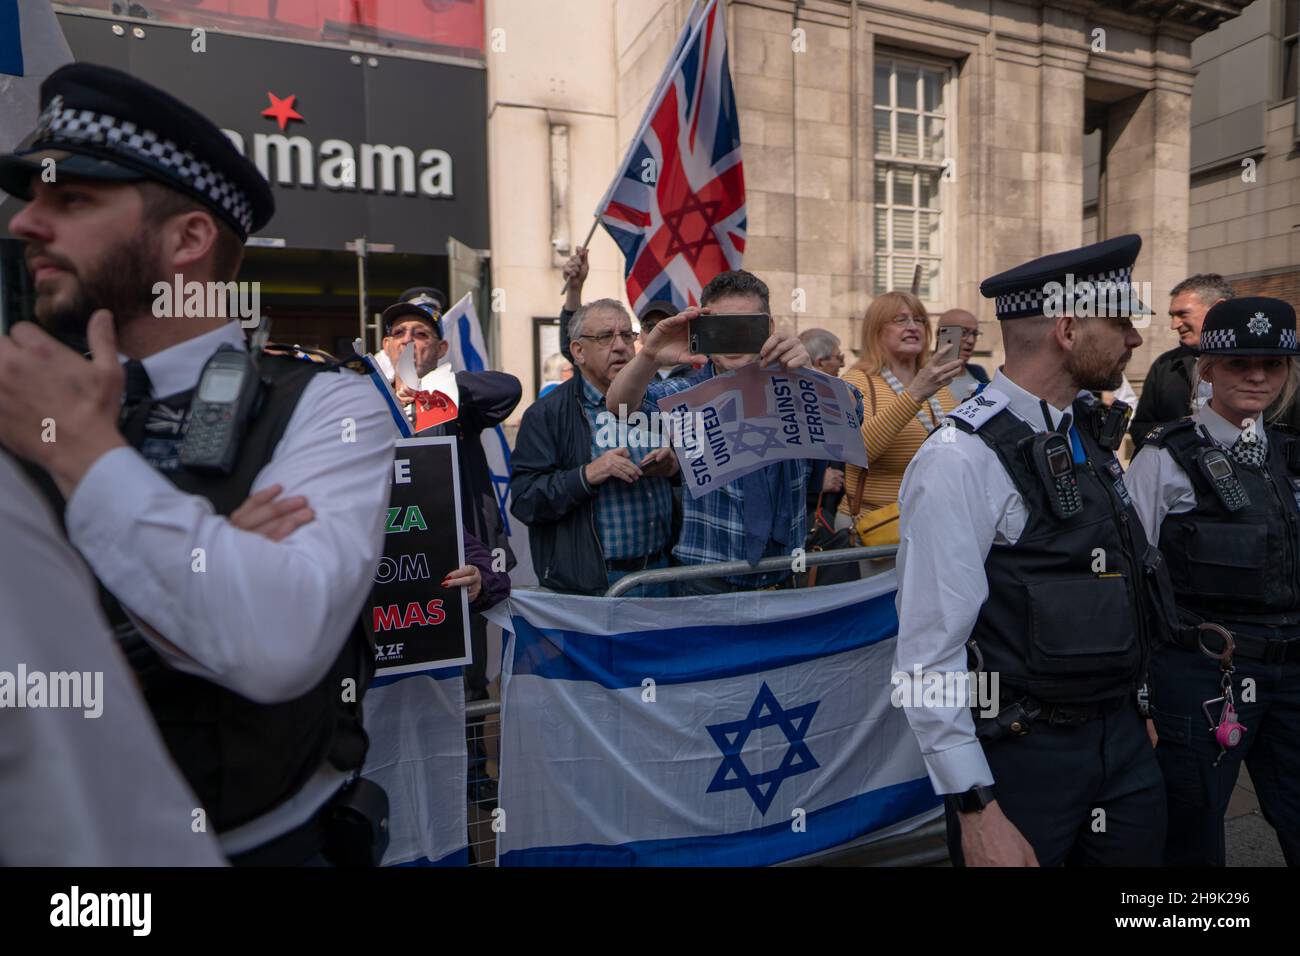 Israel supporters at a pro-Palestine demonstration (Exist, Resist Return) outside the Israel embassy in London. Photo date: Saturday, March 30, 2019. Photo credit should read: Richard Gray/EMPICS Stock Photo